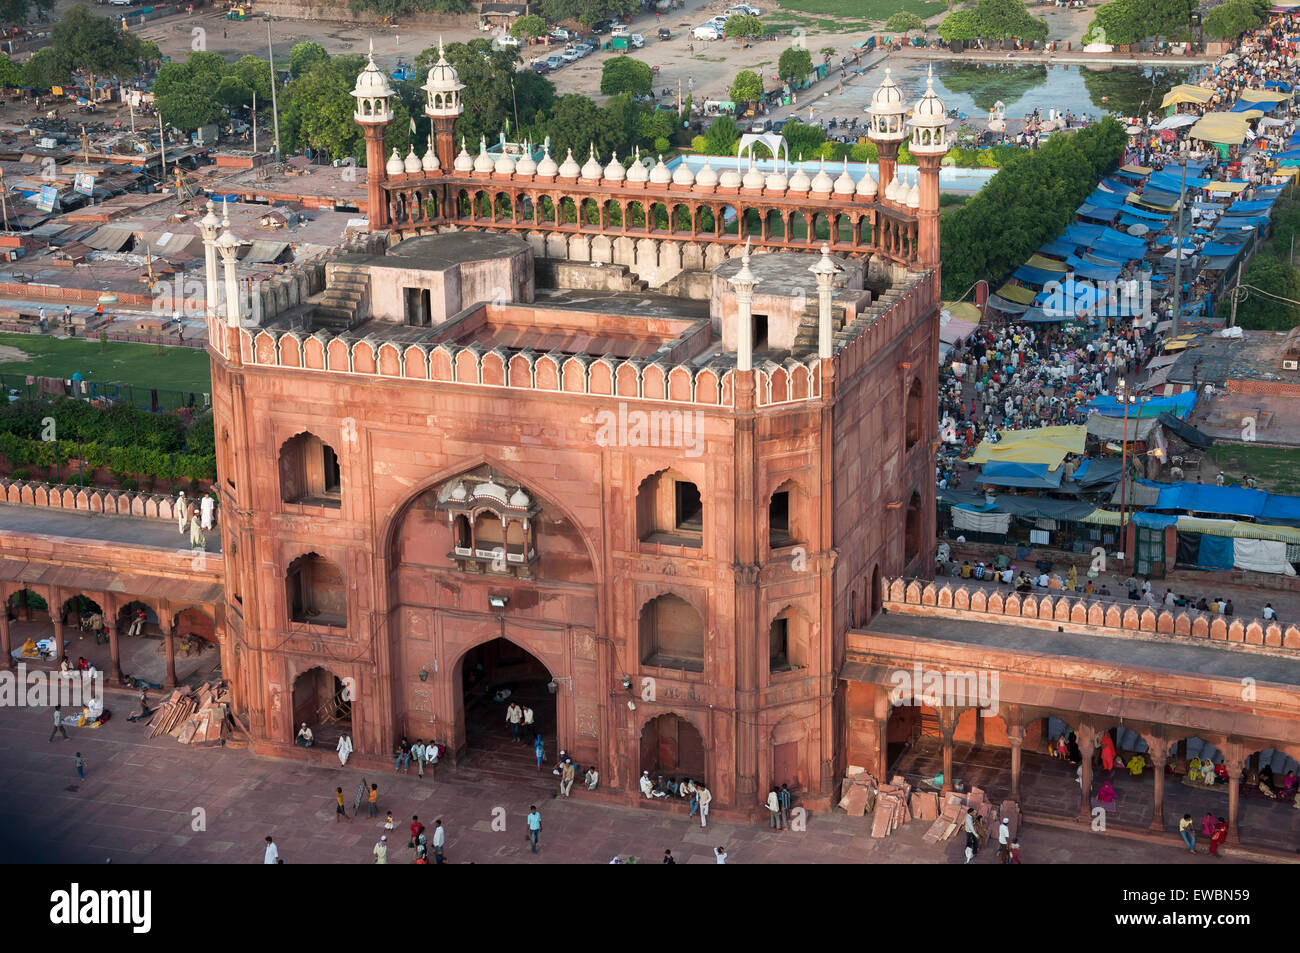 Gate of Jama Masjid mosque in old Delhi, India. Stock Photo